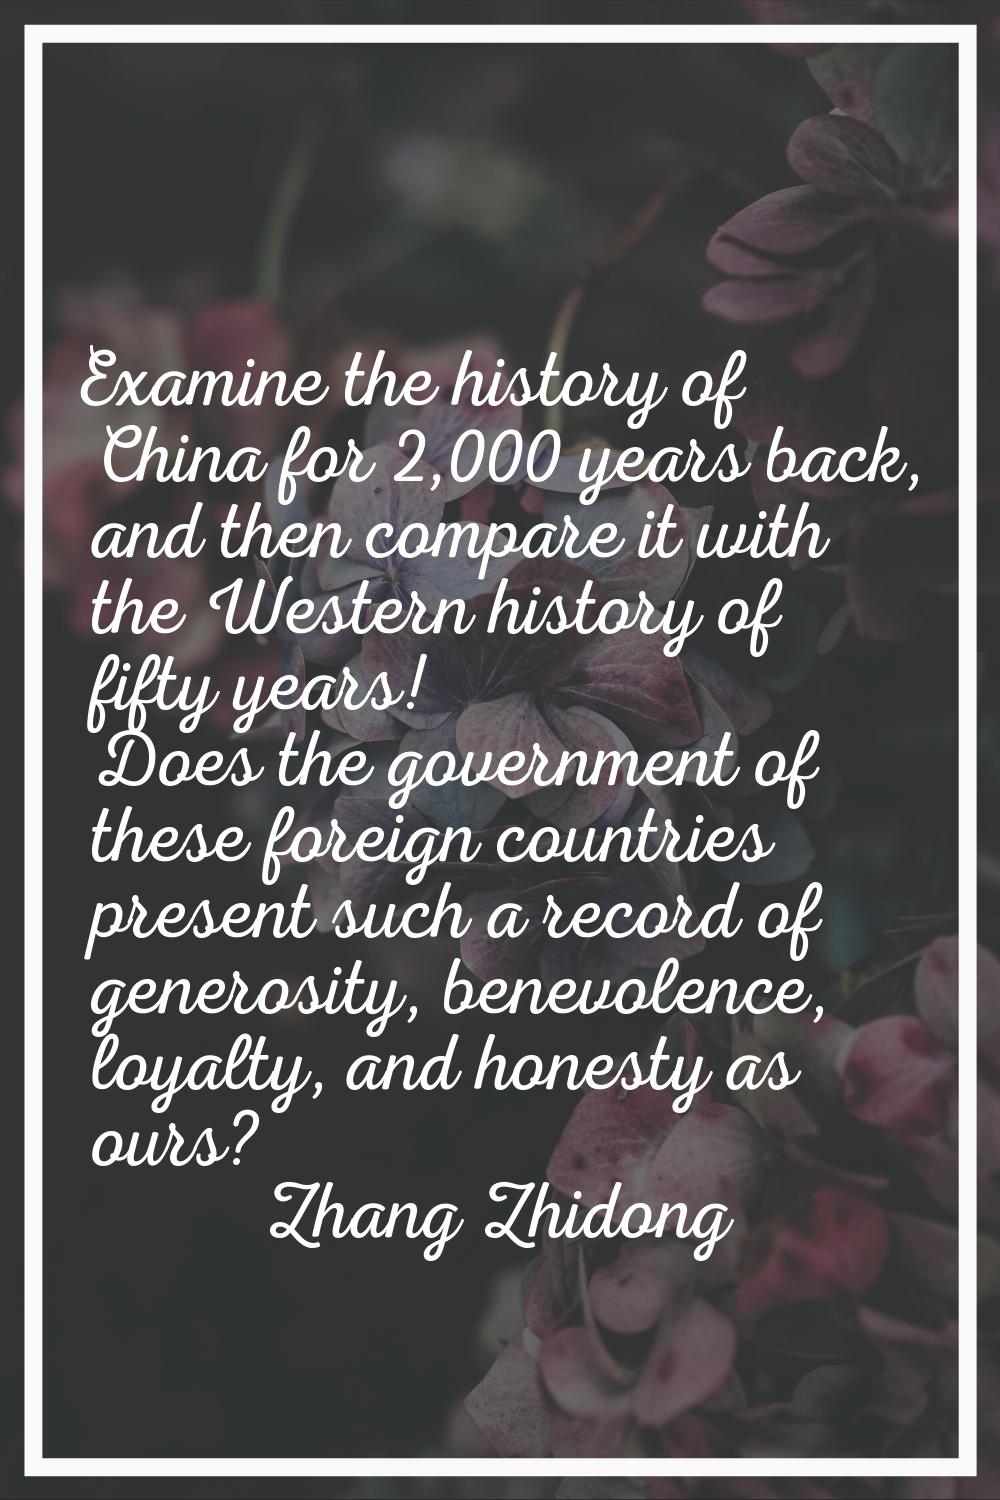 Examine the history of China for 2,000 years back, and then compare it with the Western history of 